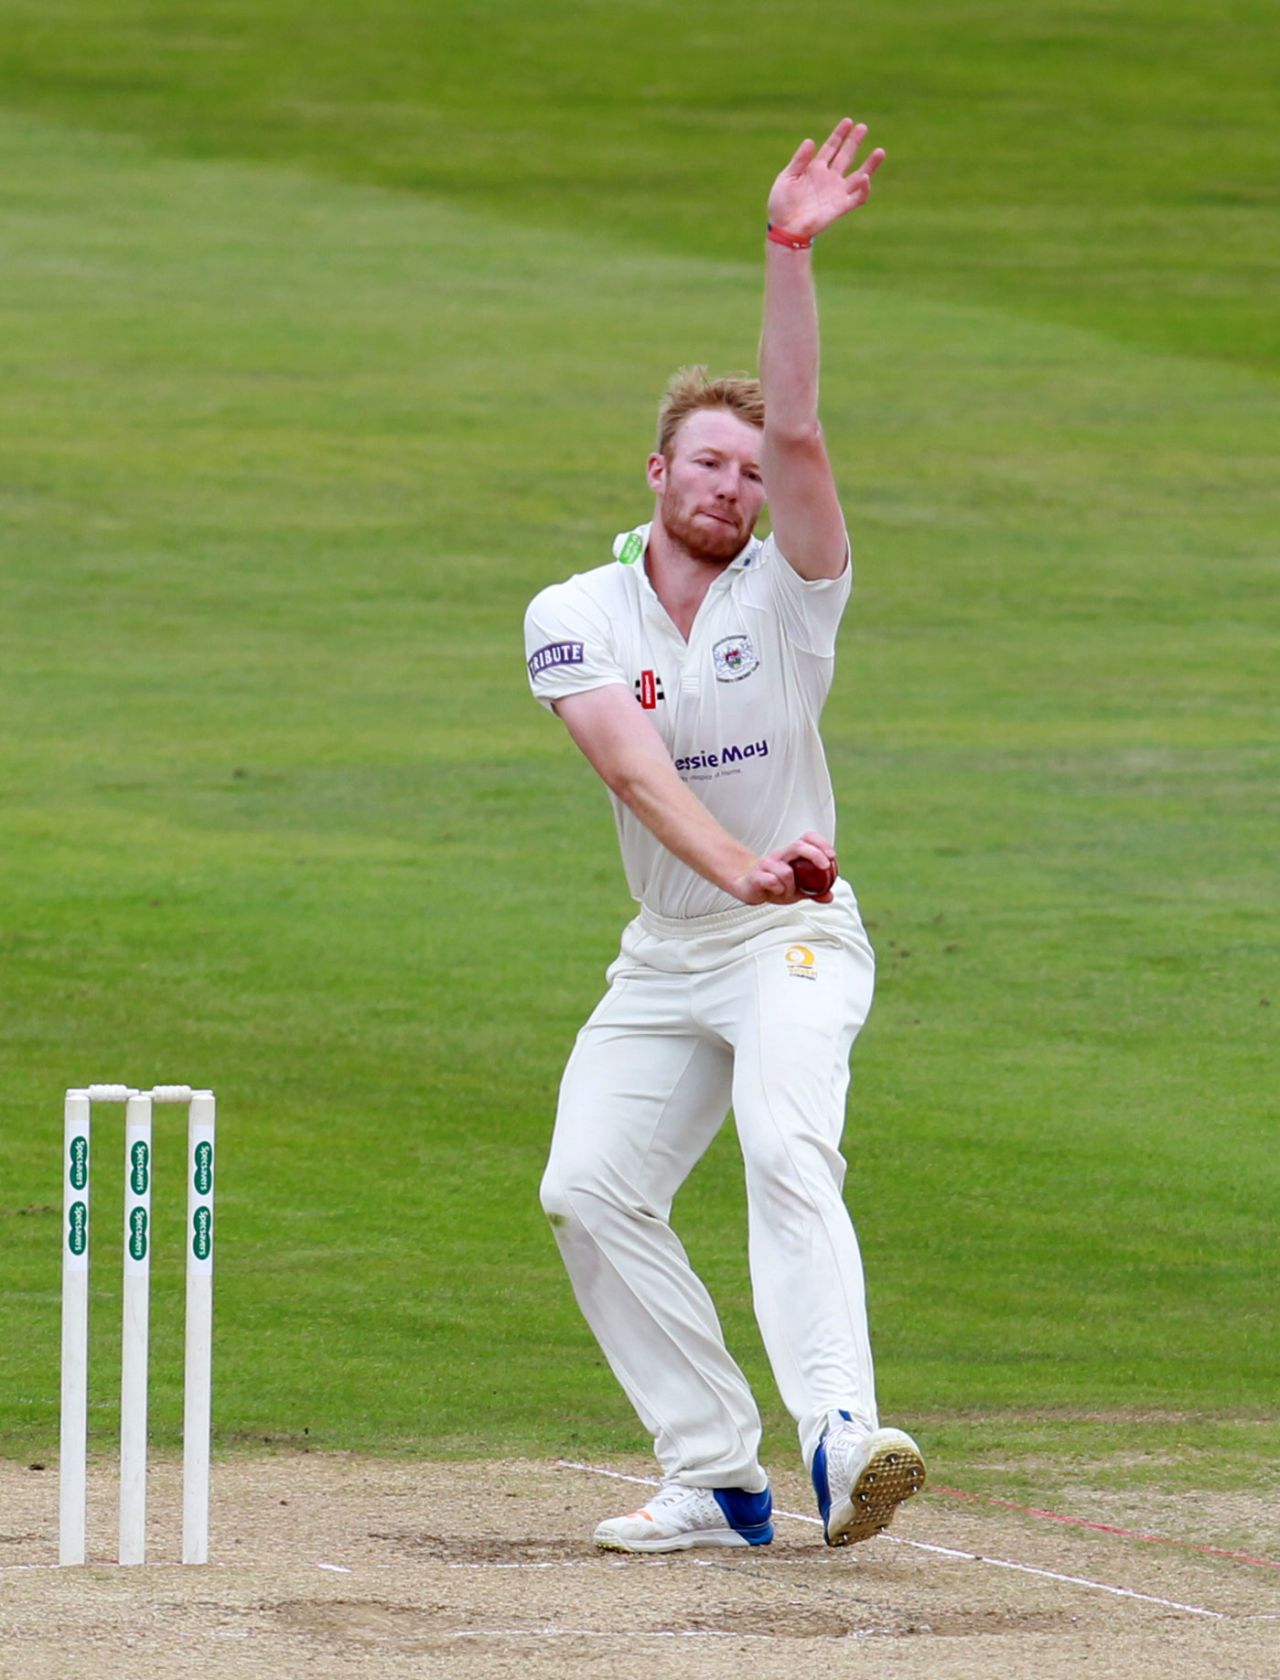 Liam Norwell in action, Northamptonshire v Gloucestershire, August 17, 2017